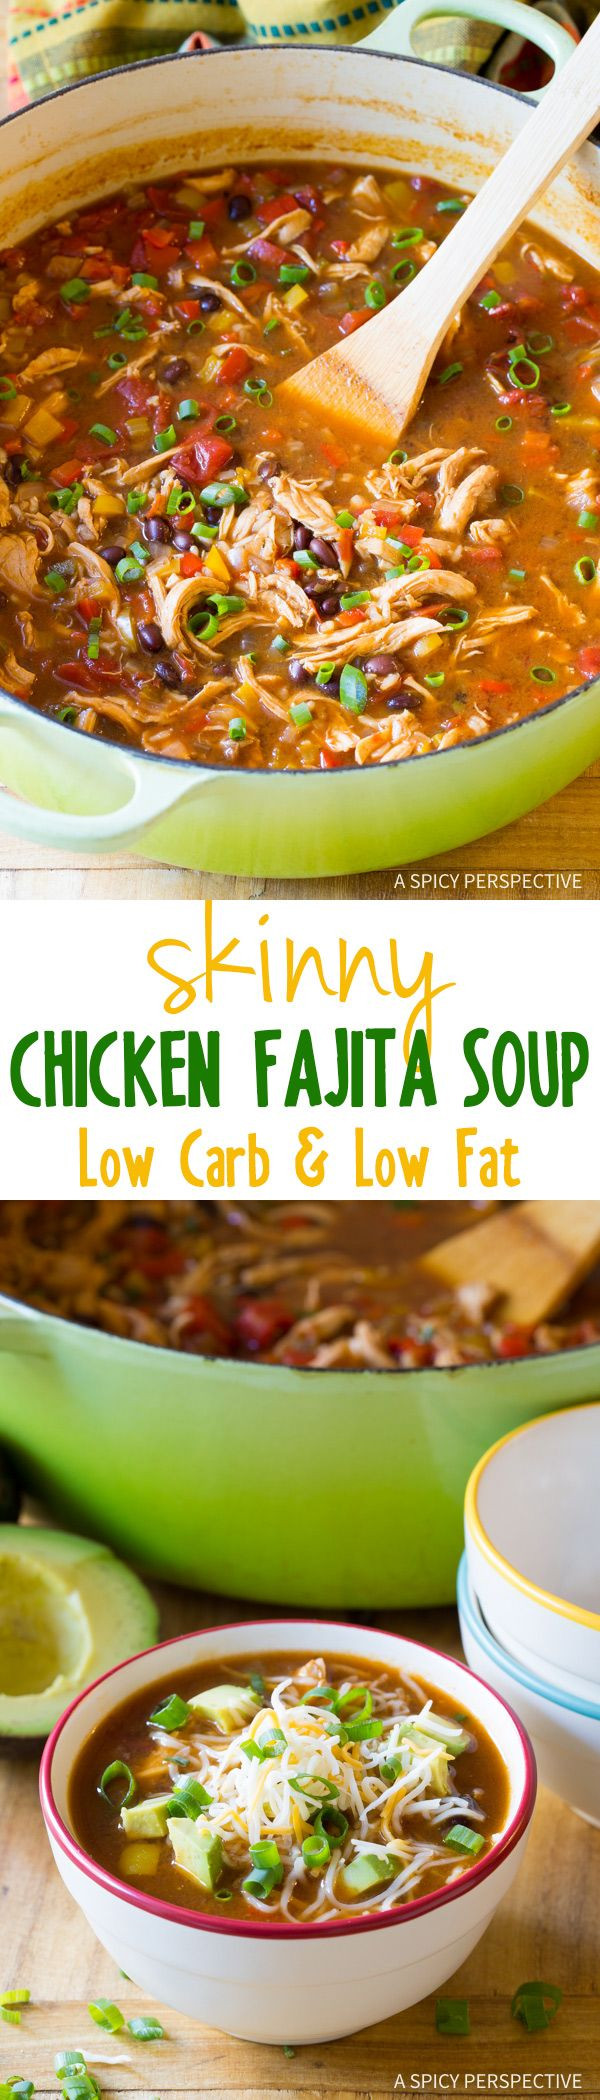 Low Carb Low Fat Recipes
 25 best ideas about Low carb lunch on Pinterest